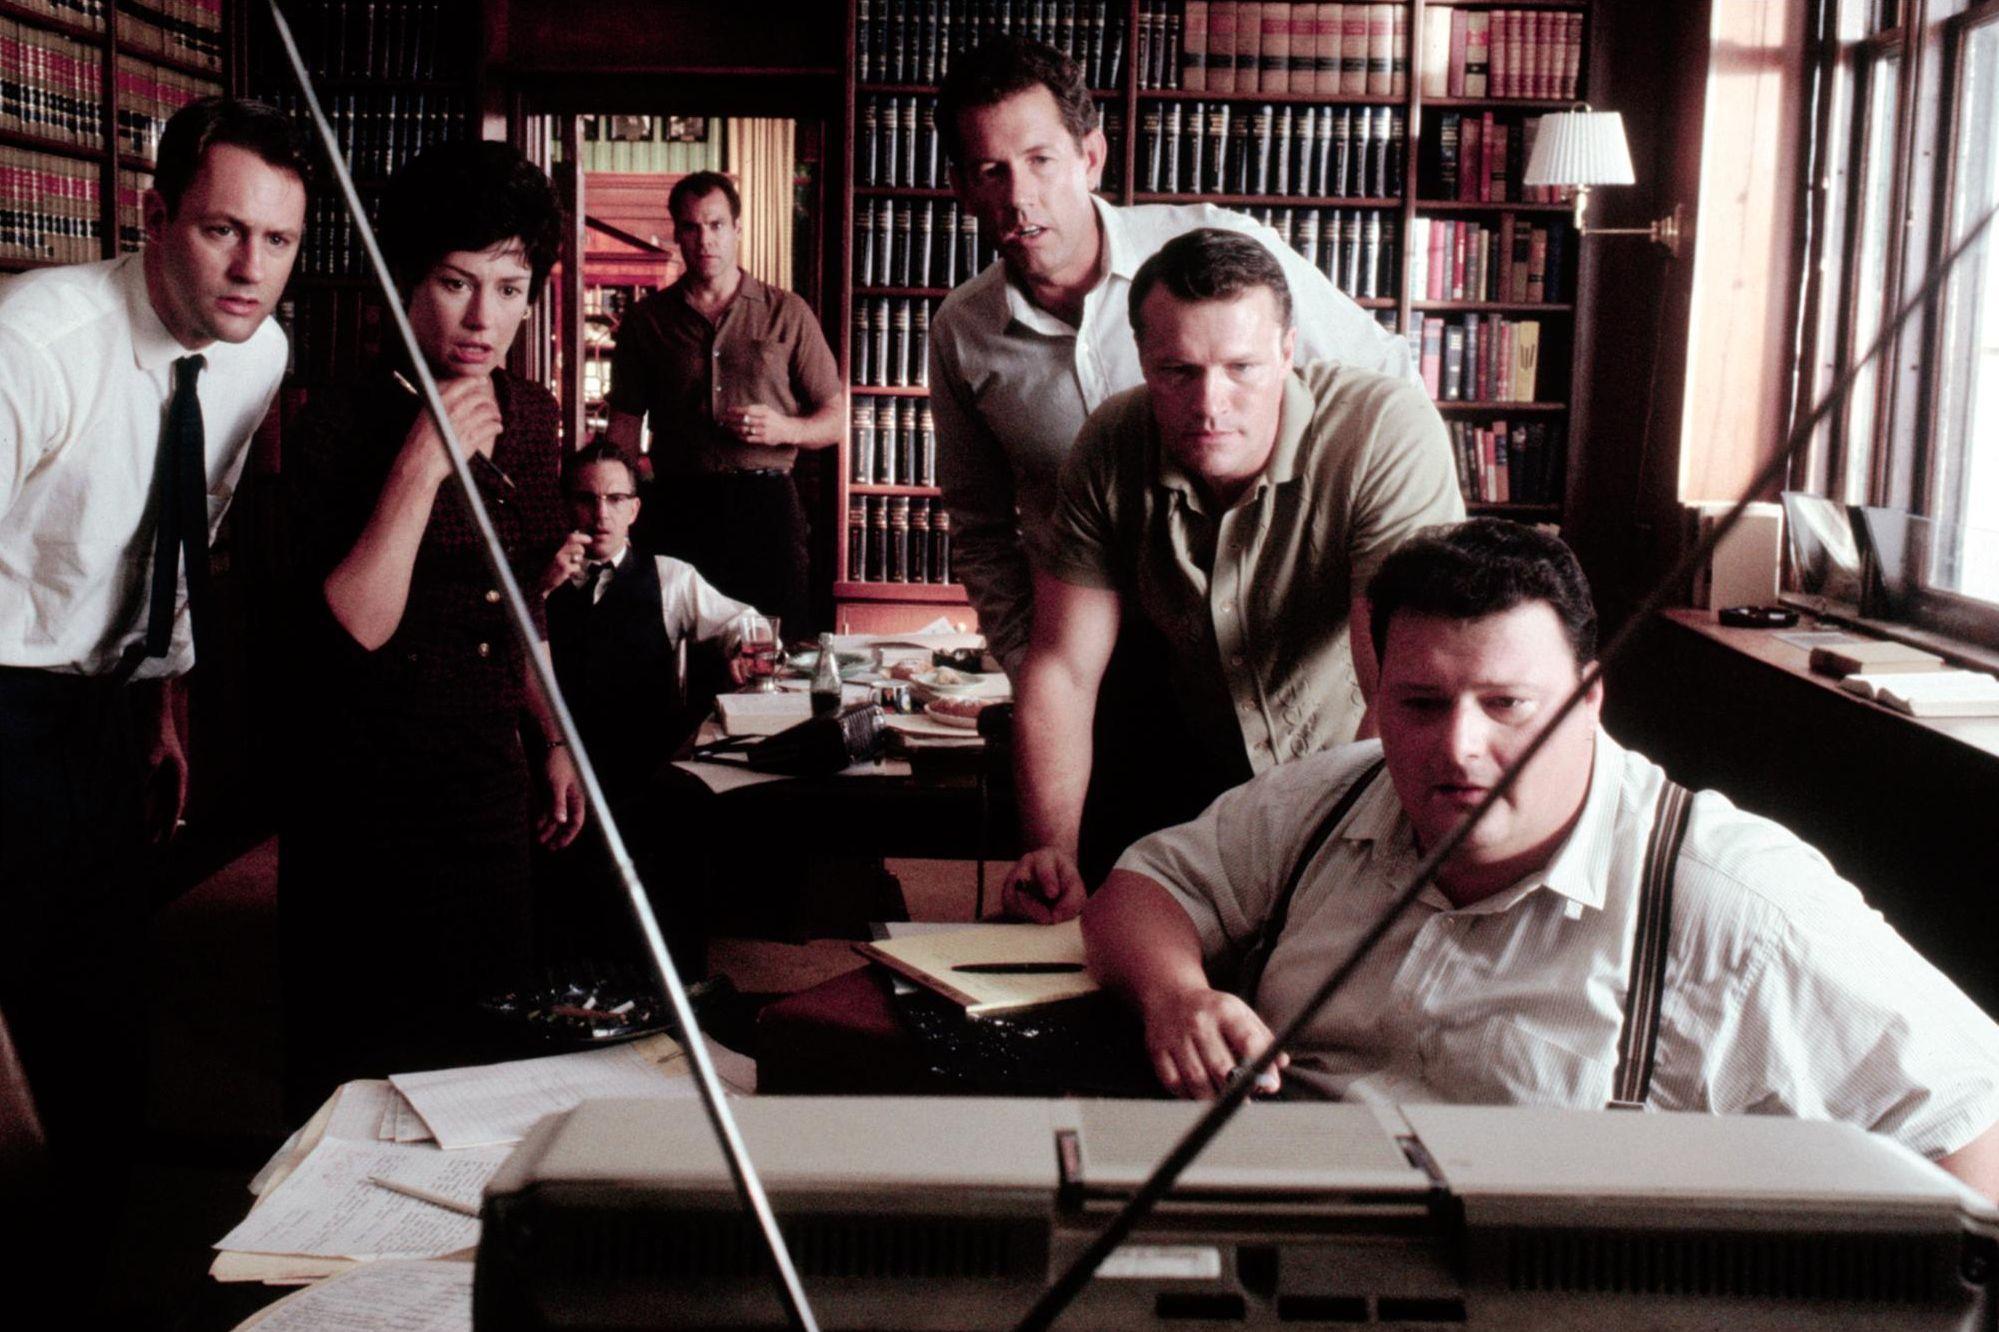 still-of-kevin-costner_-wayne-knight_-laurie-metcalf_-michael-rooker-and-jay-o_-sanders-in-jfk-_1991_-large-picture.jpg